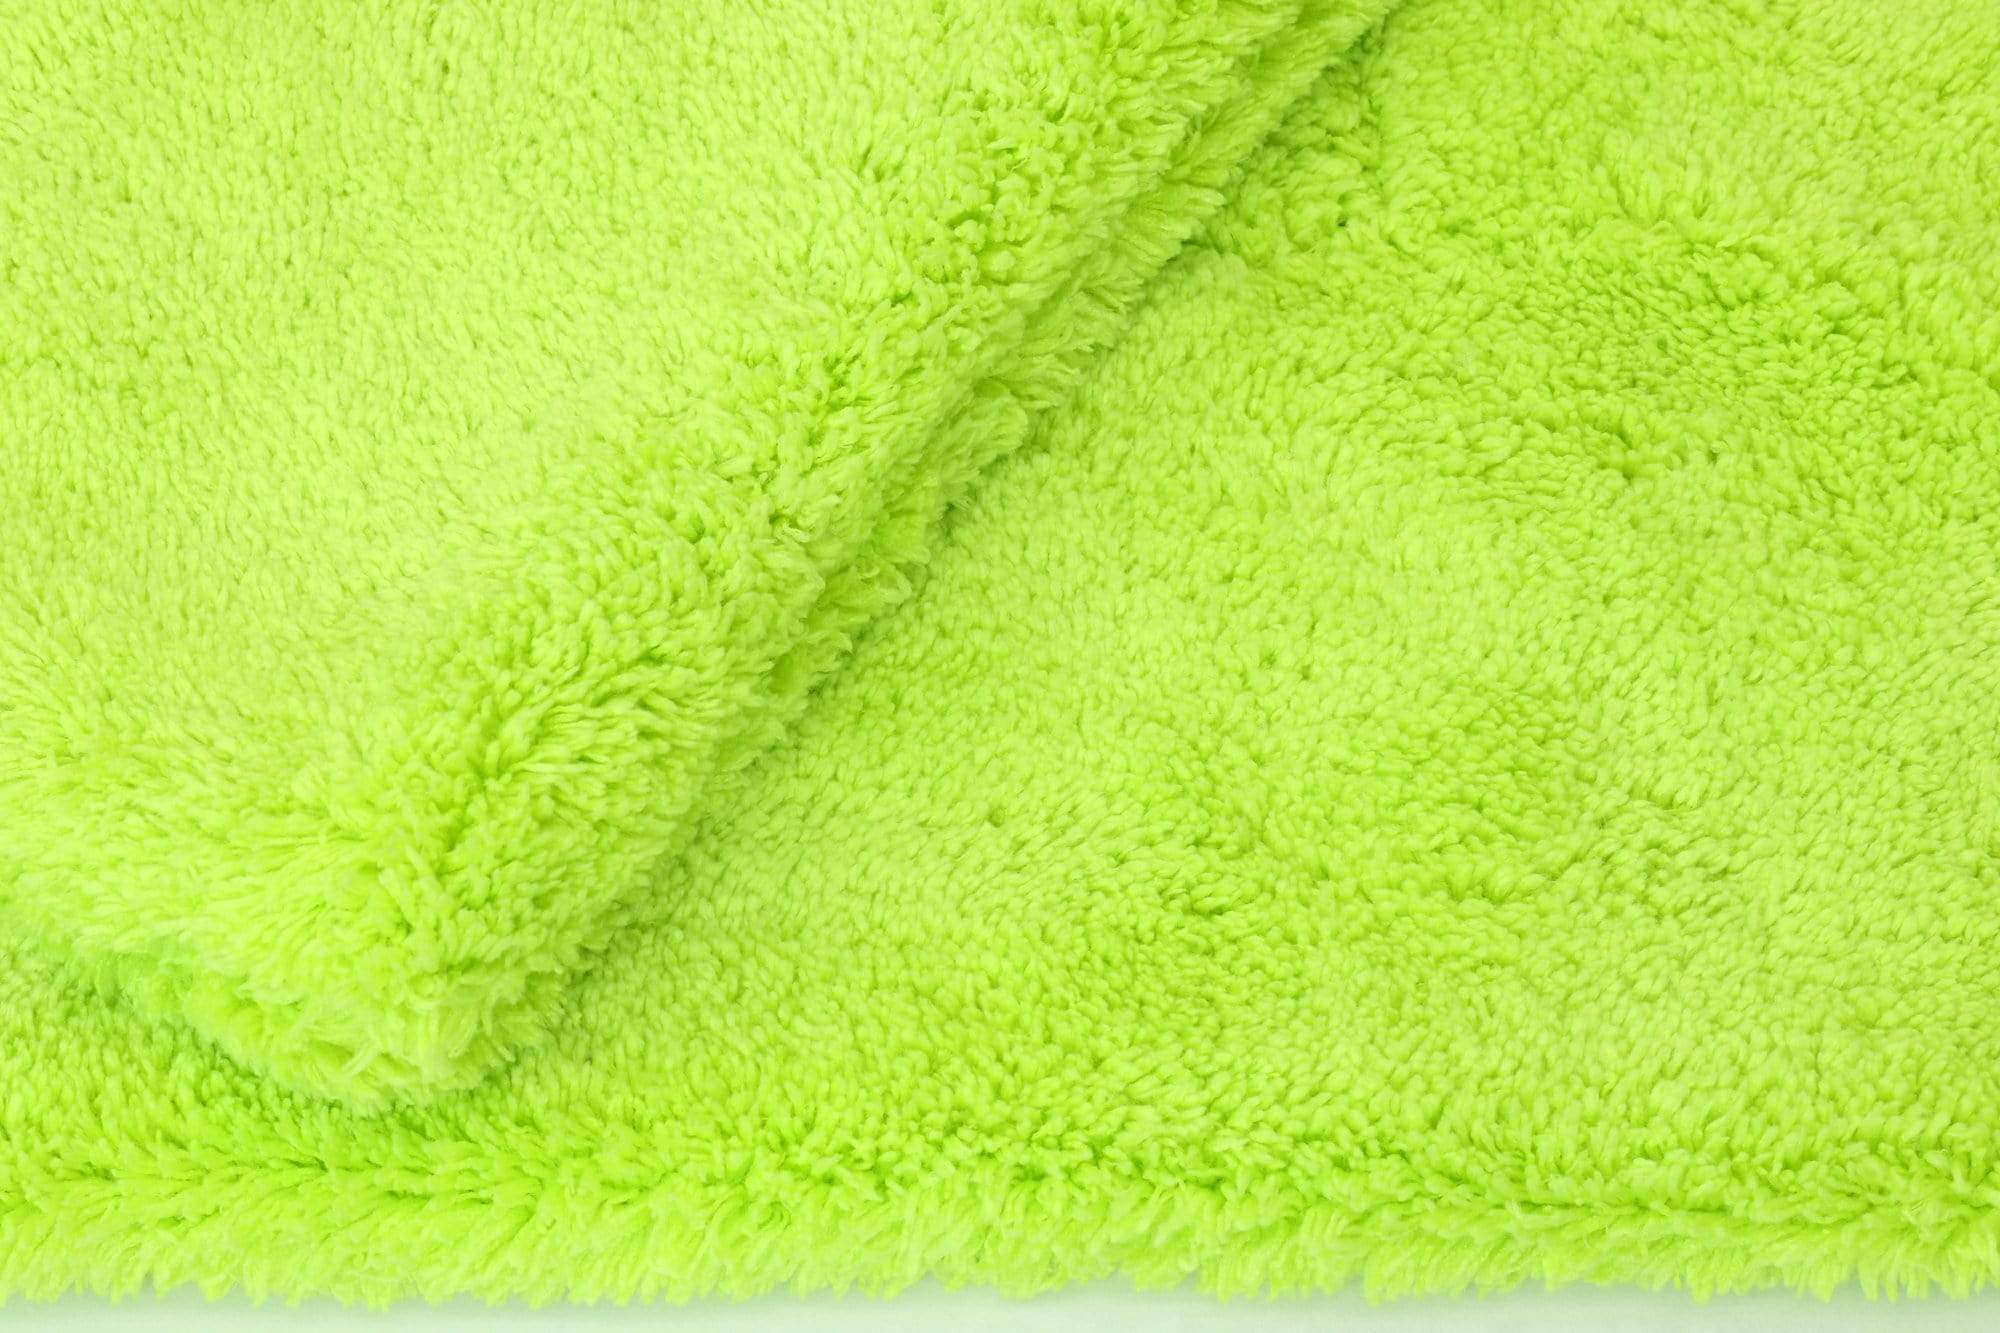 Autofiber Towel [Motherfluffer XL+] Xtra-Large Plush Microfiber Drying Towel (20 in. x 40 in., 1100 gsm) 1 pack